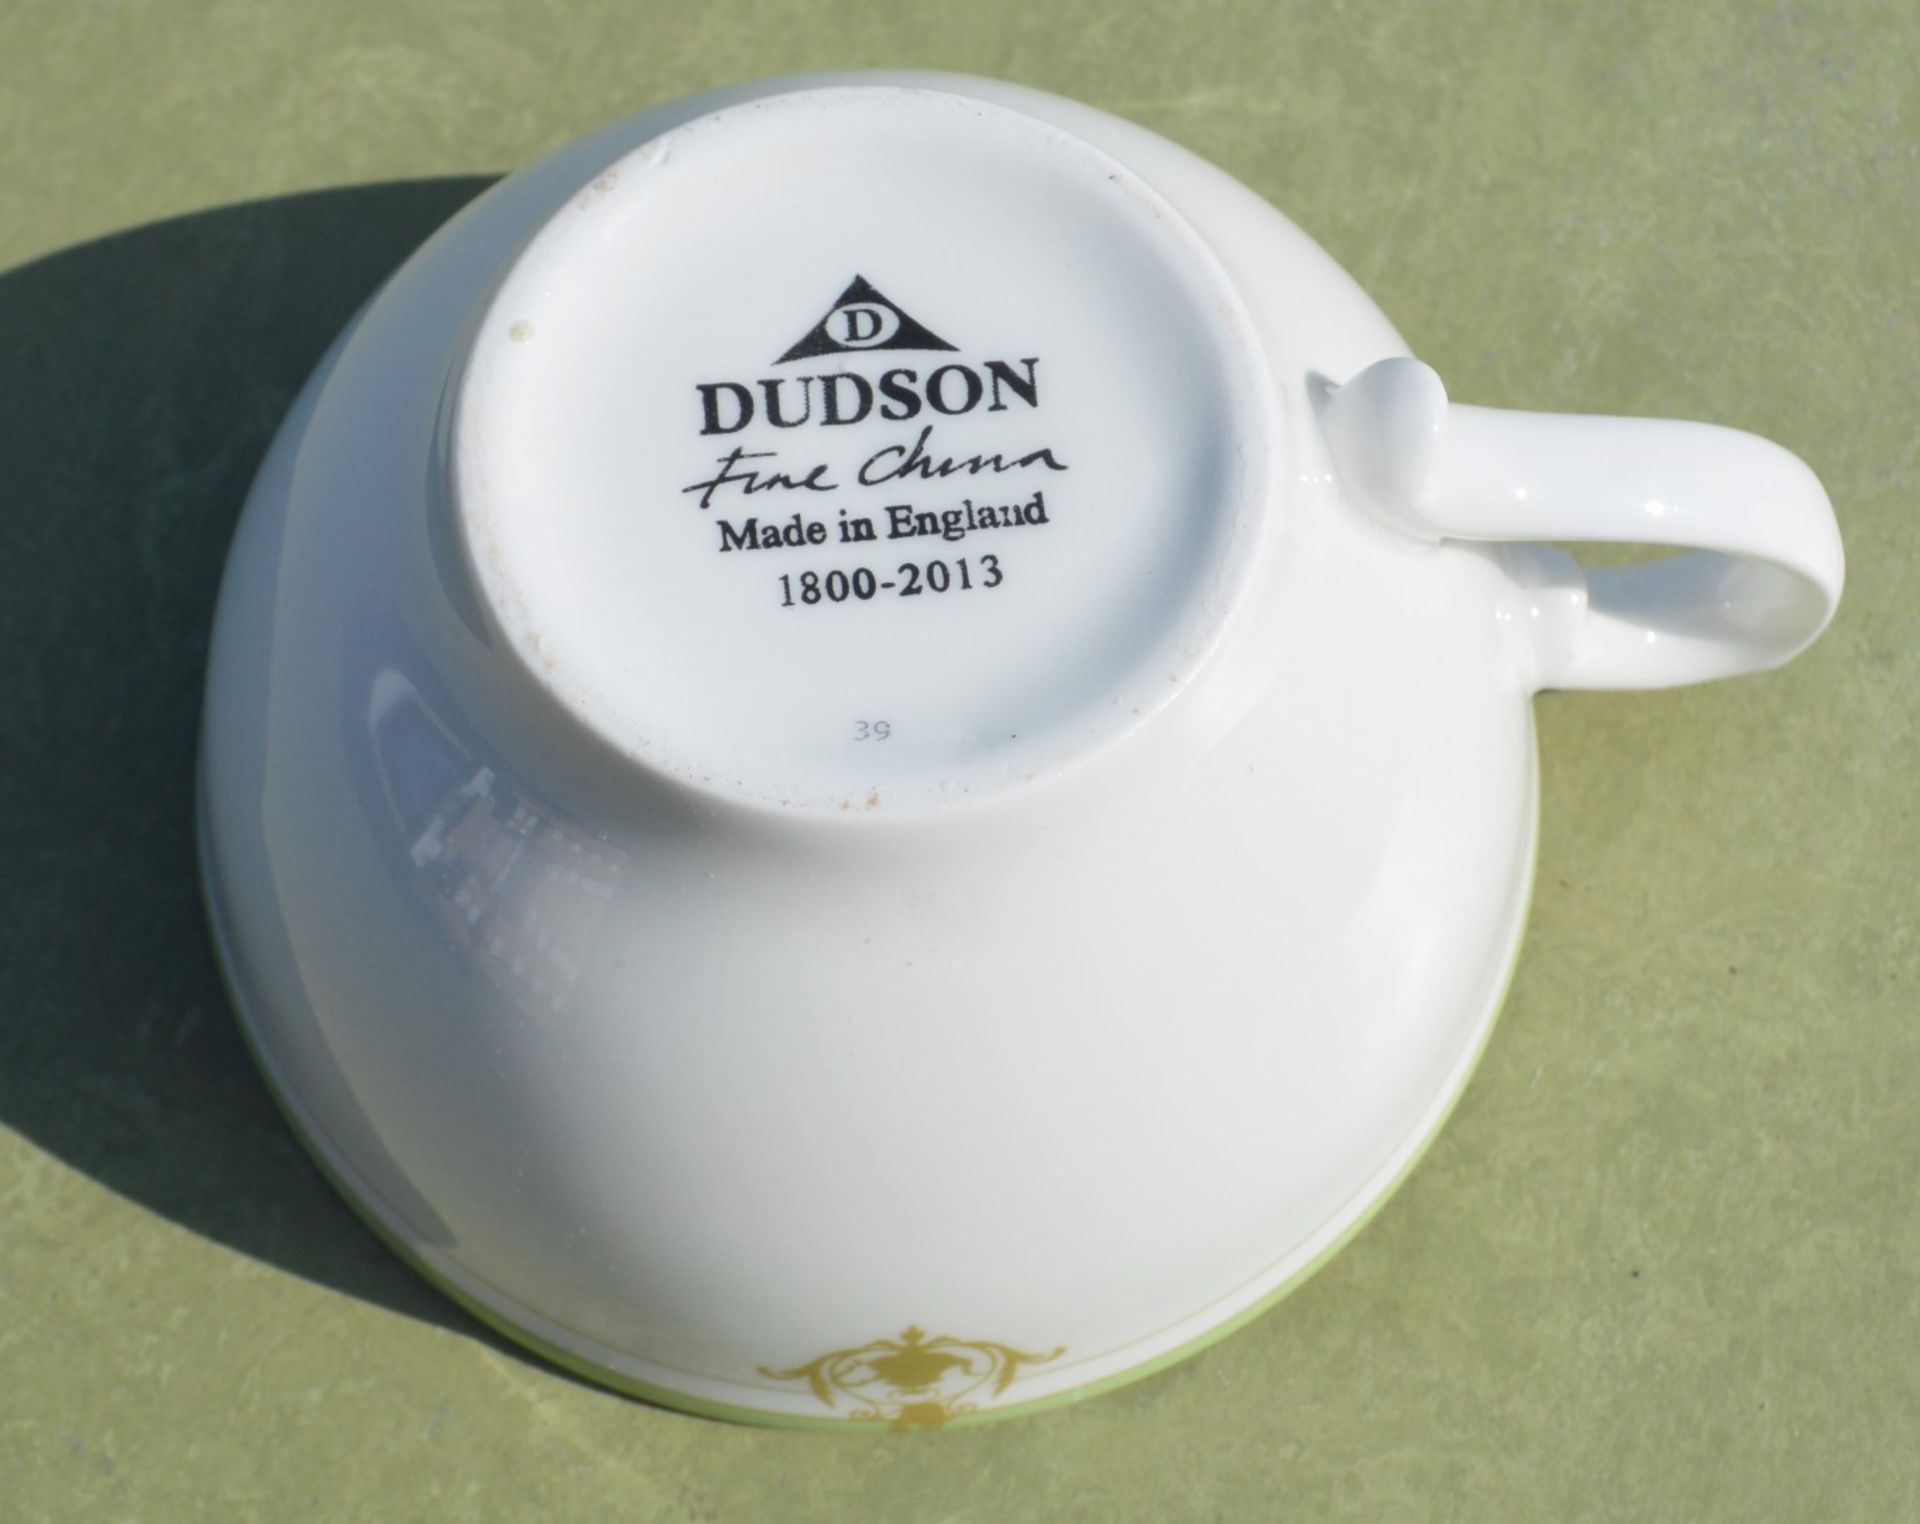 36 x DUDSON Fine China 'Georgian' Low Tea Cups With With Saucers All Featuring 'Famous Branding' - - Image 3 of 8